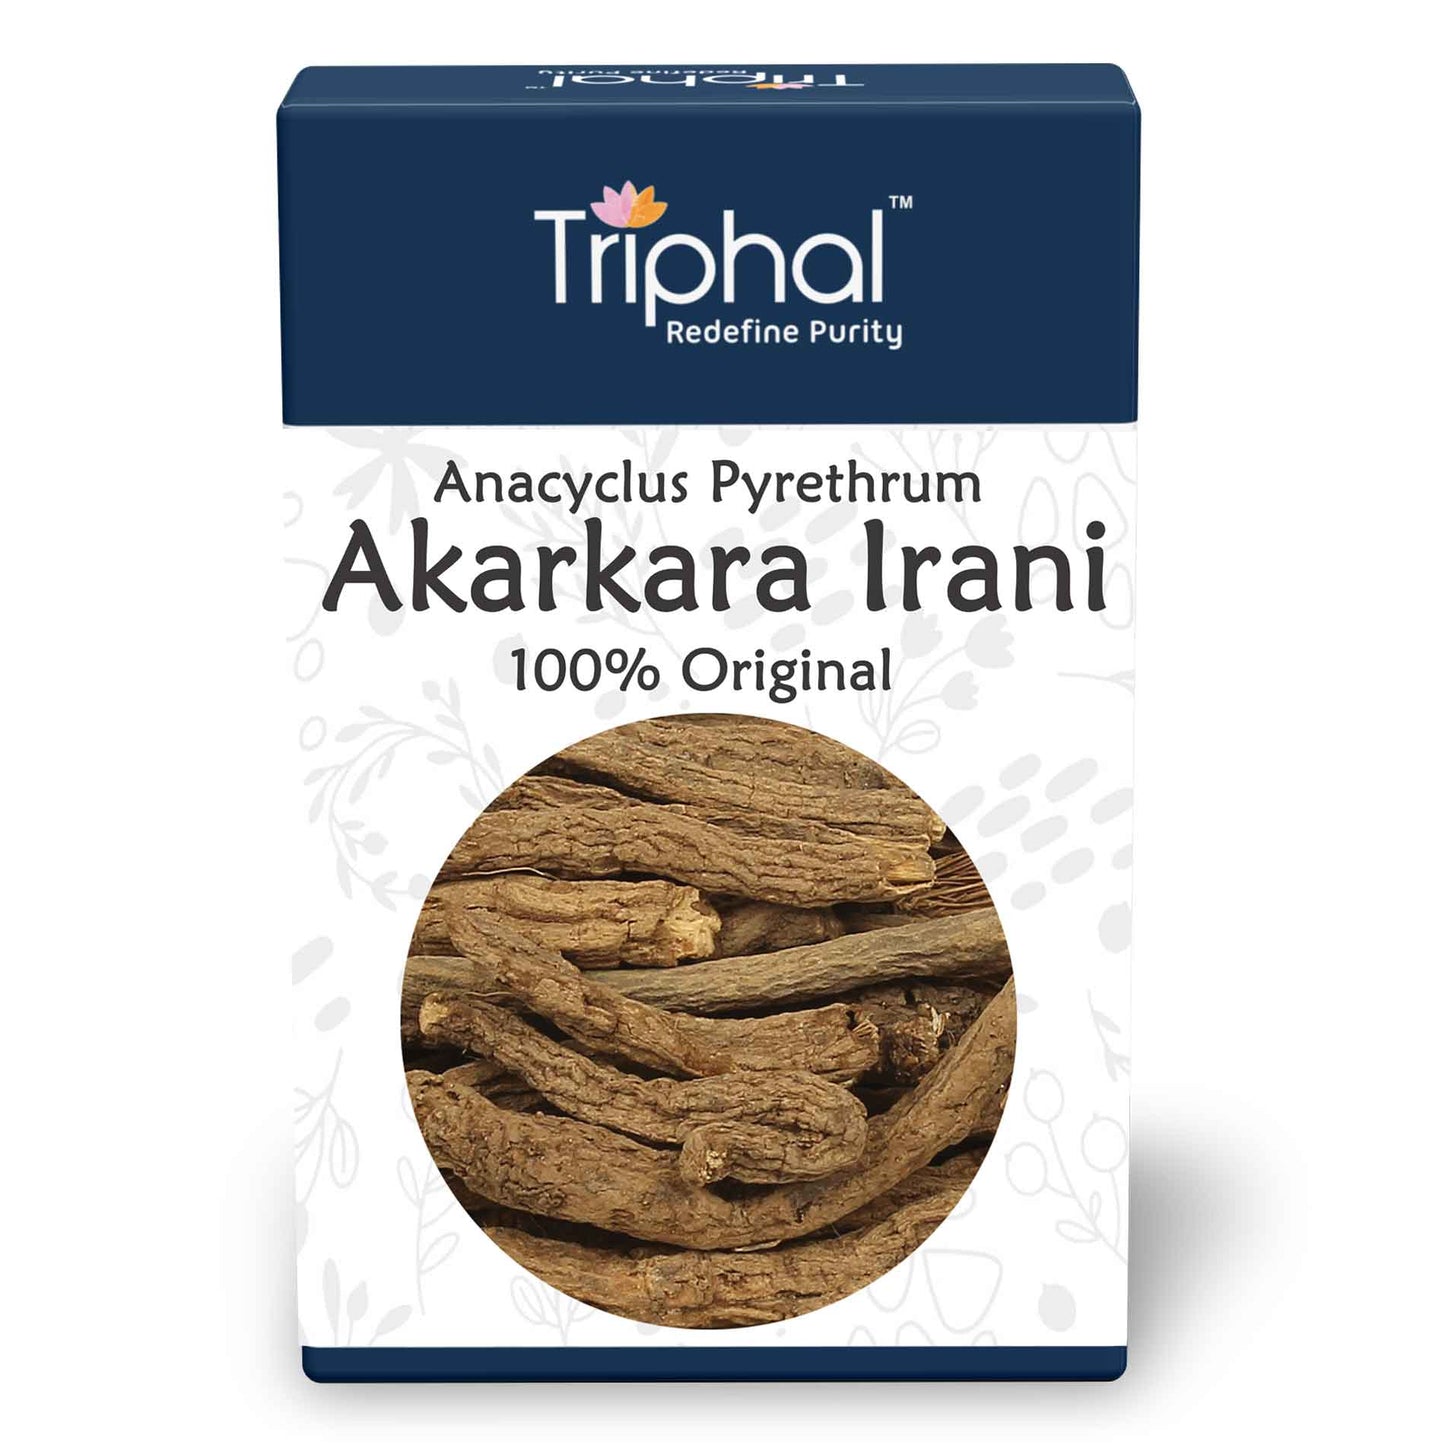 Triphal brand Akarkara Irani - Original Ayurvedic and Unani Herb used for males wellbeing, toothache and indigestion